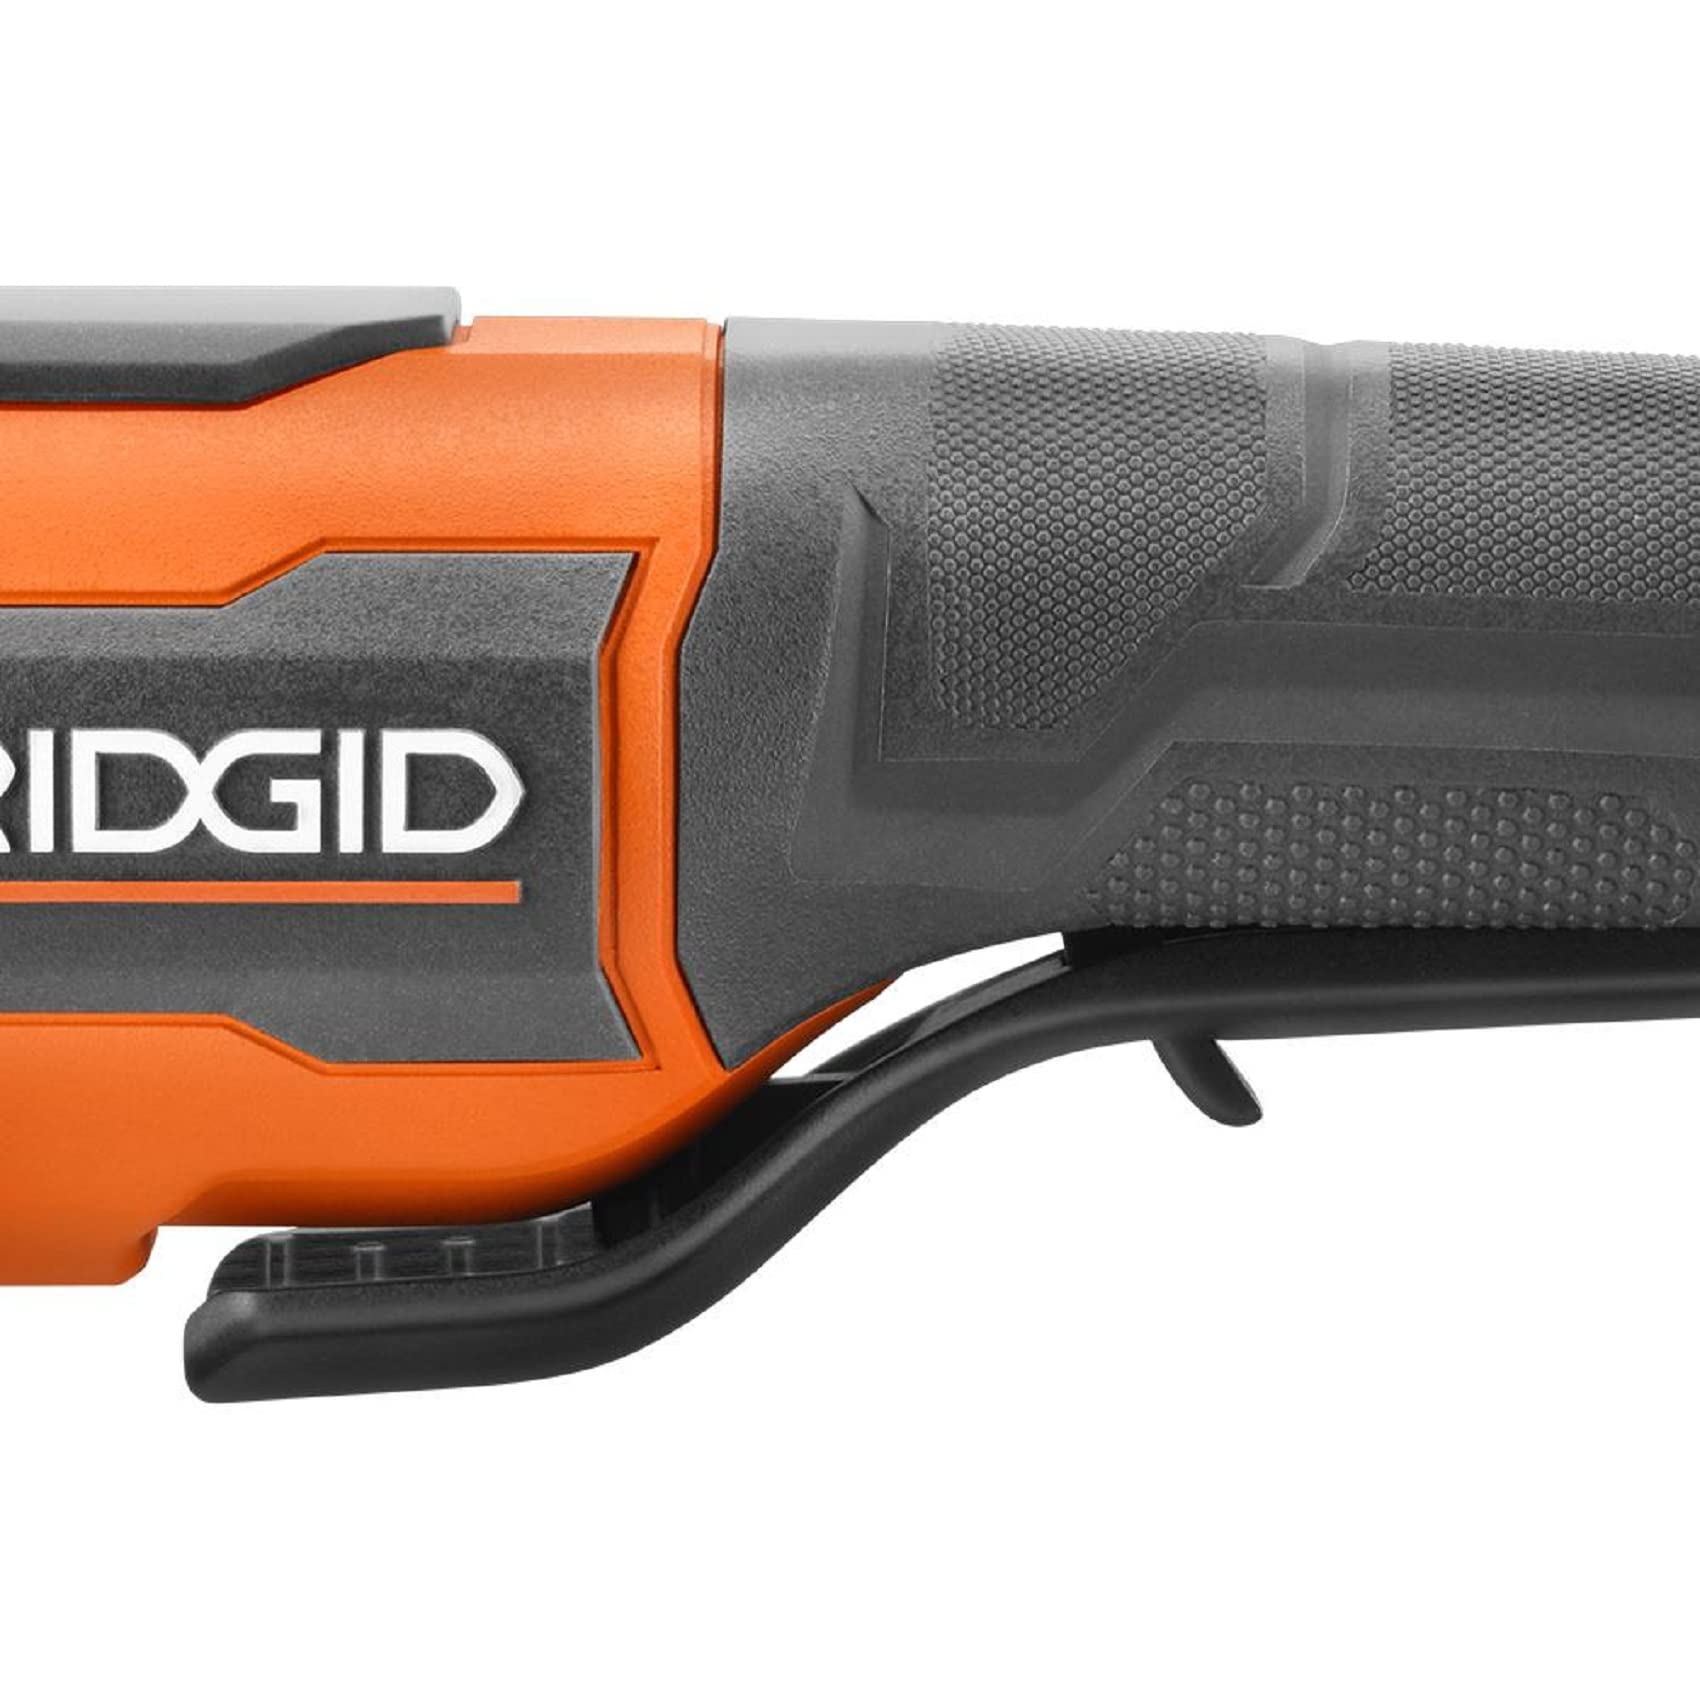 RIDGID 18V Brushless Cordless 4-1/2 in. Paddle Switch Angle Grinder (Tool Only) (Renewed)